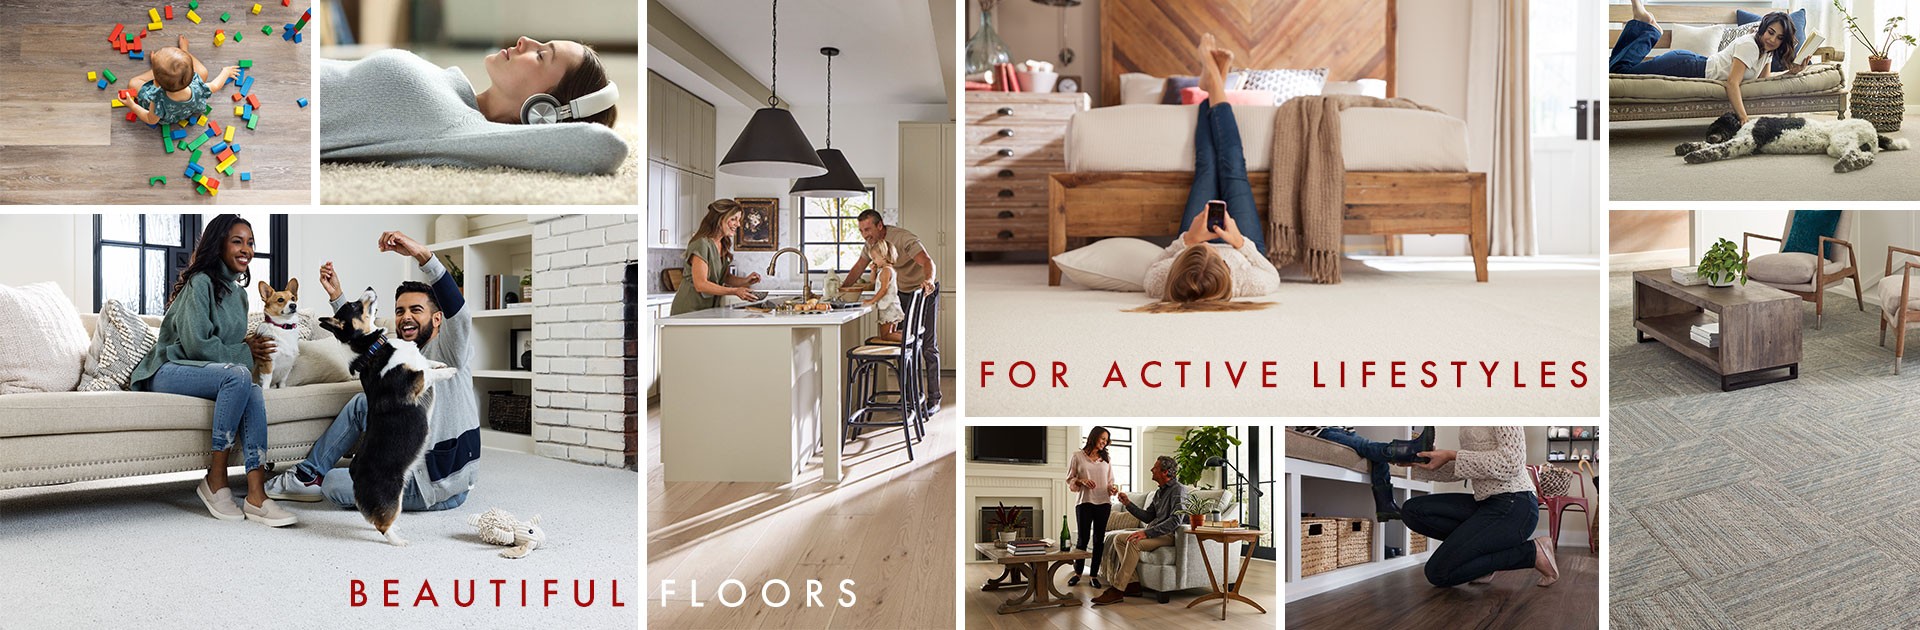 Beautiful Floors for Active Lifestyles